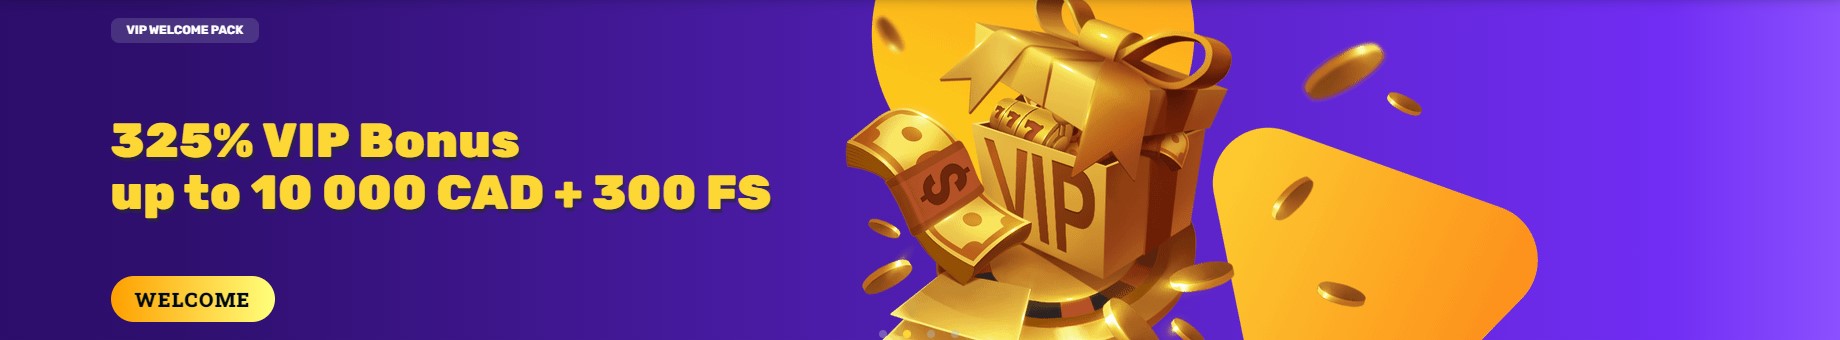 Sophisticated and exclusive main banner image for Rocket Play Casino, highlighting the casino's VIP welcome offer and presenting a premium, high-end gaming experience for discerning players.